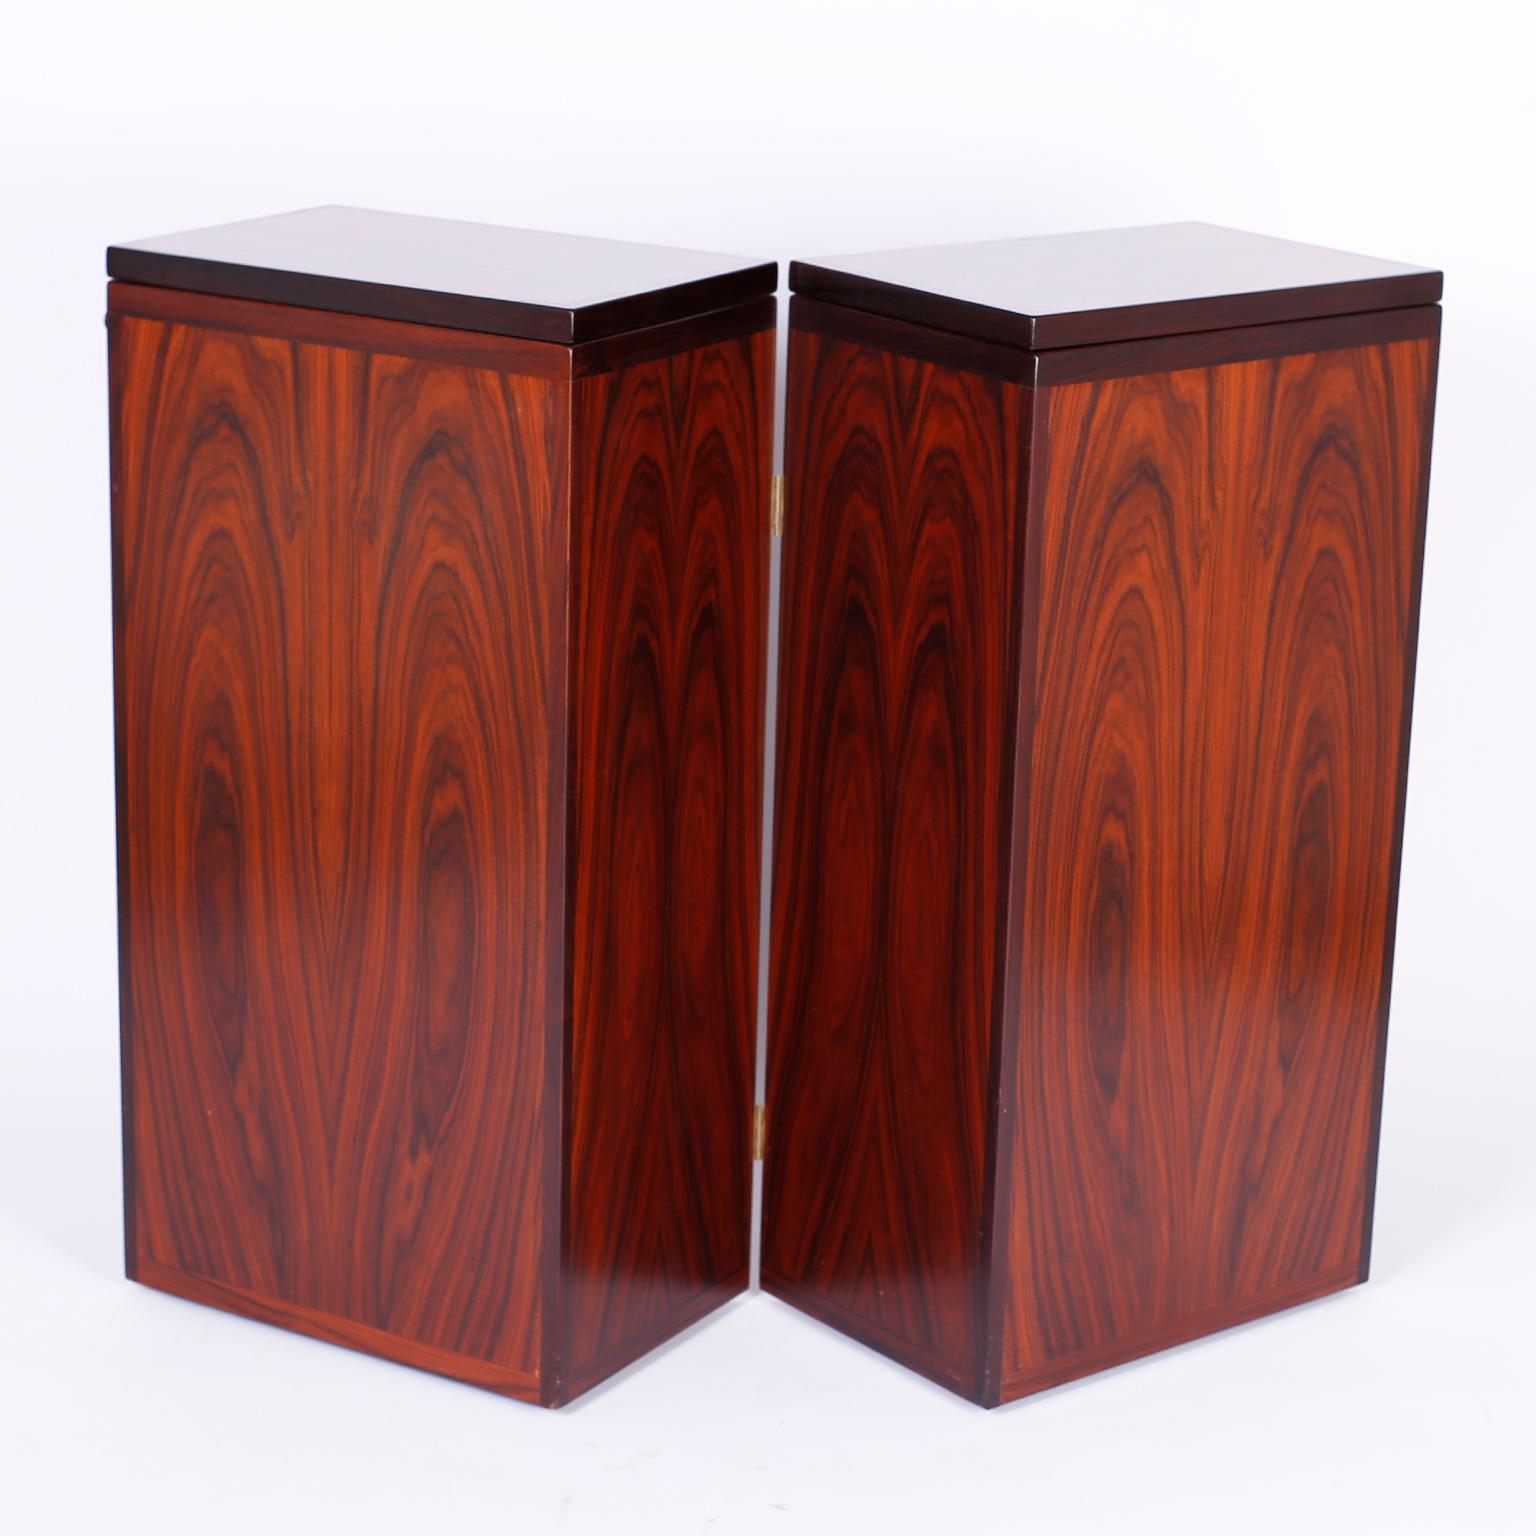 Well grained rosewood bar cabinet that opens to reveal a campaign style interior with plenty of storage and a fold out top service area. Designed by Reno Wall Iverson for Dyrlund, Denmark. 

Open width 36
Fold out top width 72.